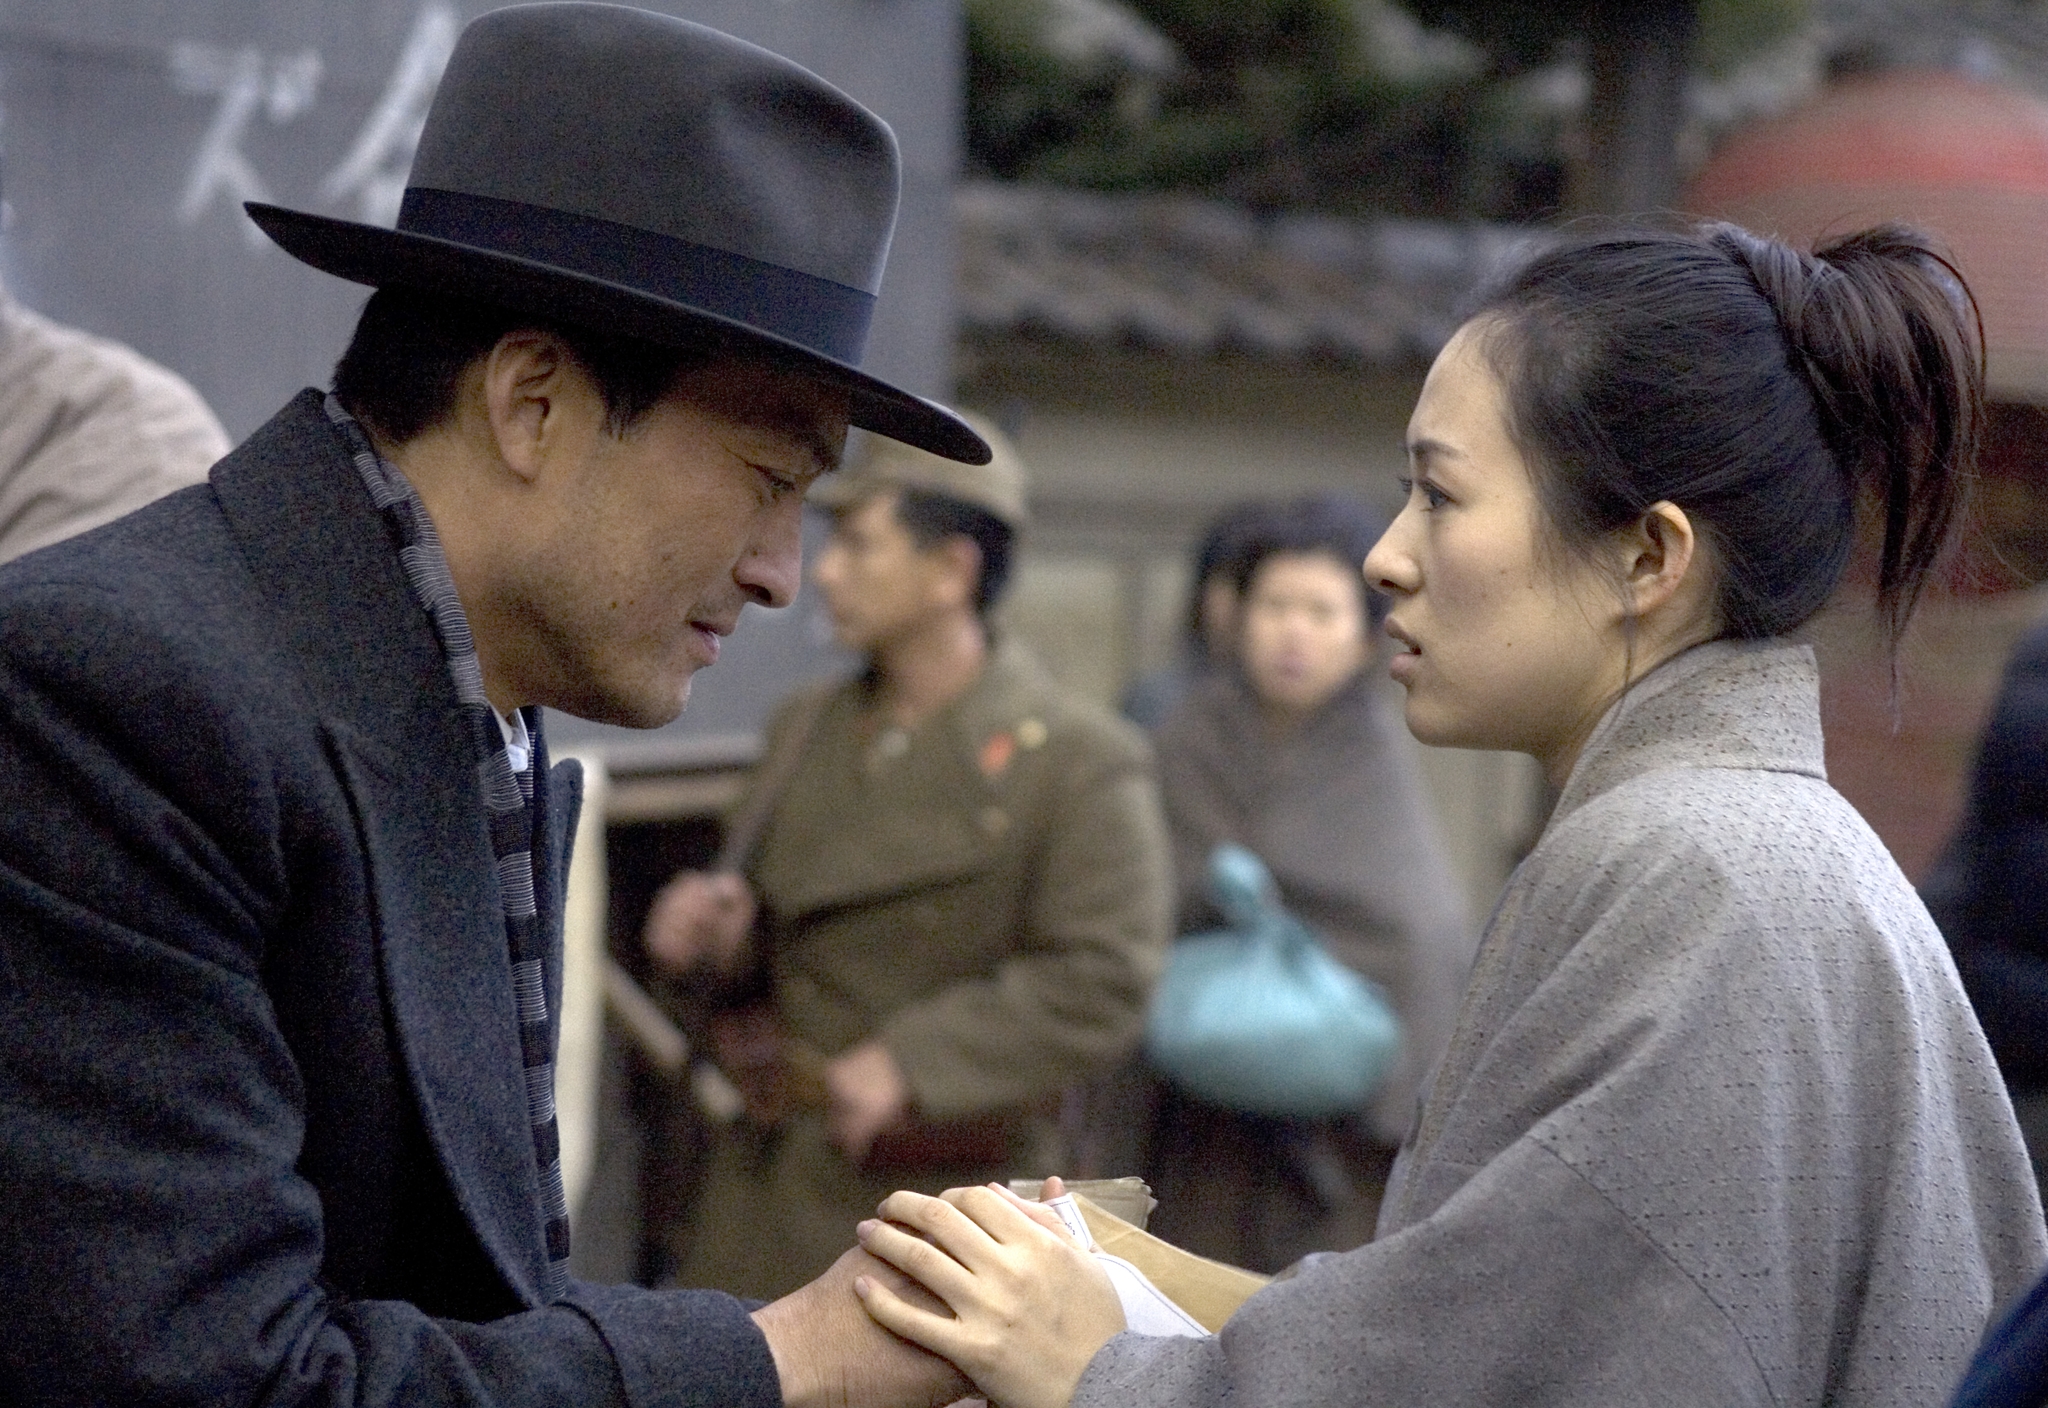 Prominent actors Ken Watanabe and Zhang Ziyi in a captivating scene.